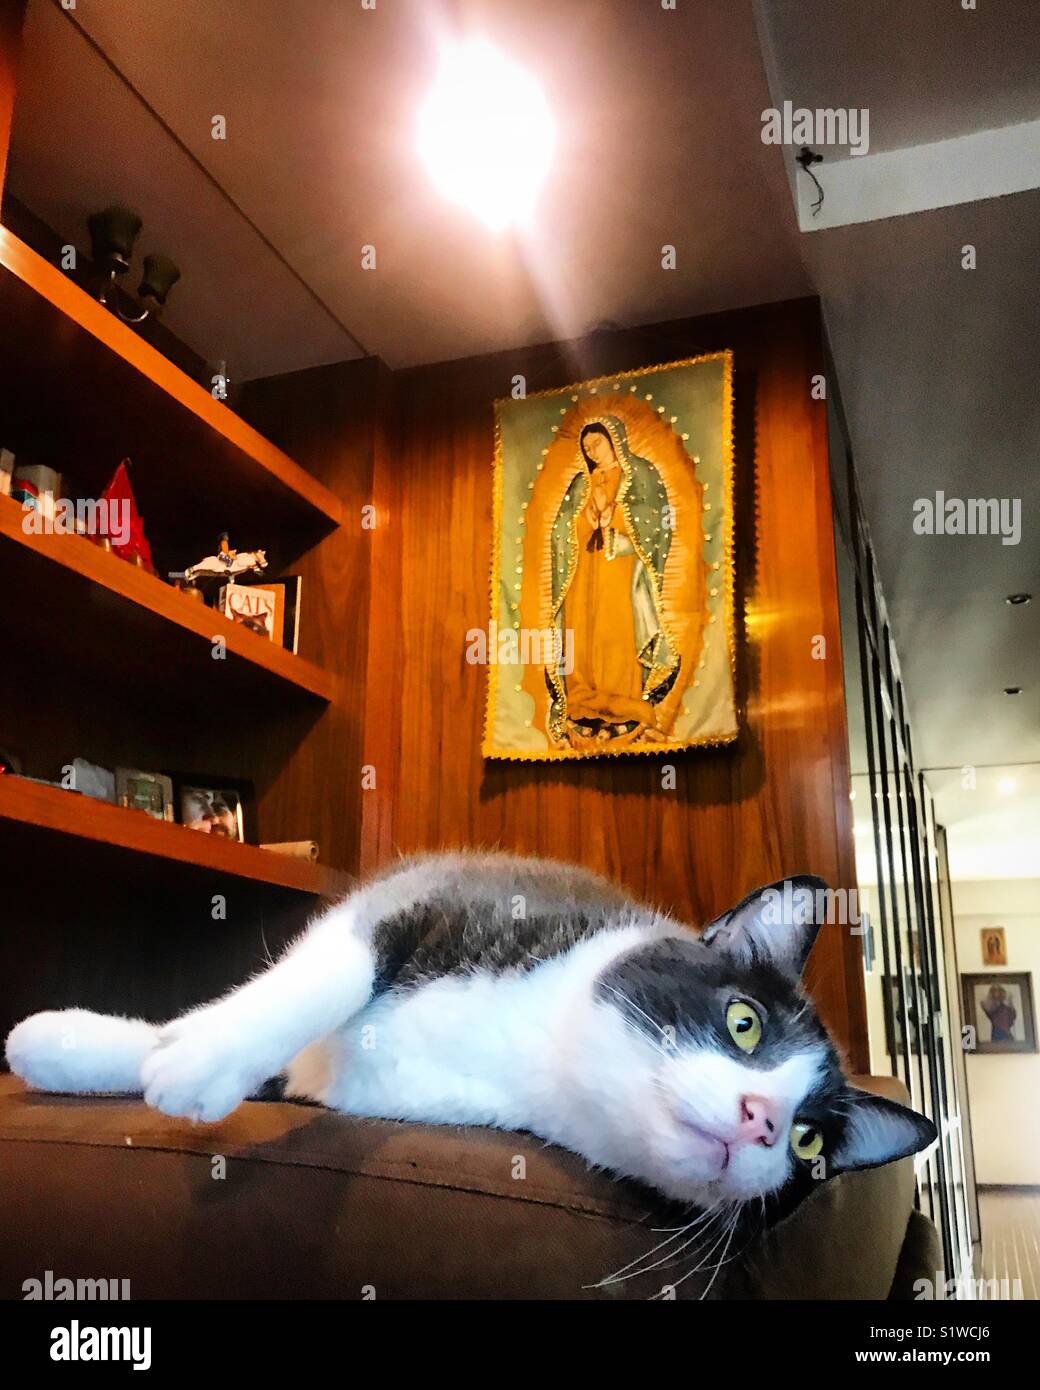 A cat rest in a sofa in front of an image of Our Lady of Guadalupe in Mexico City, Mexico Stock Photo